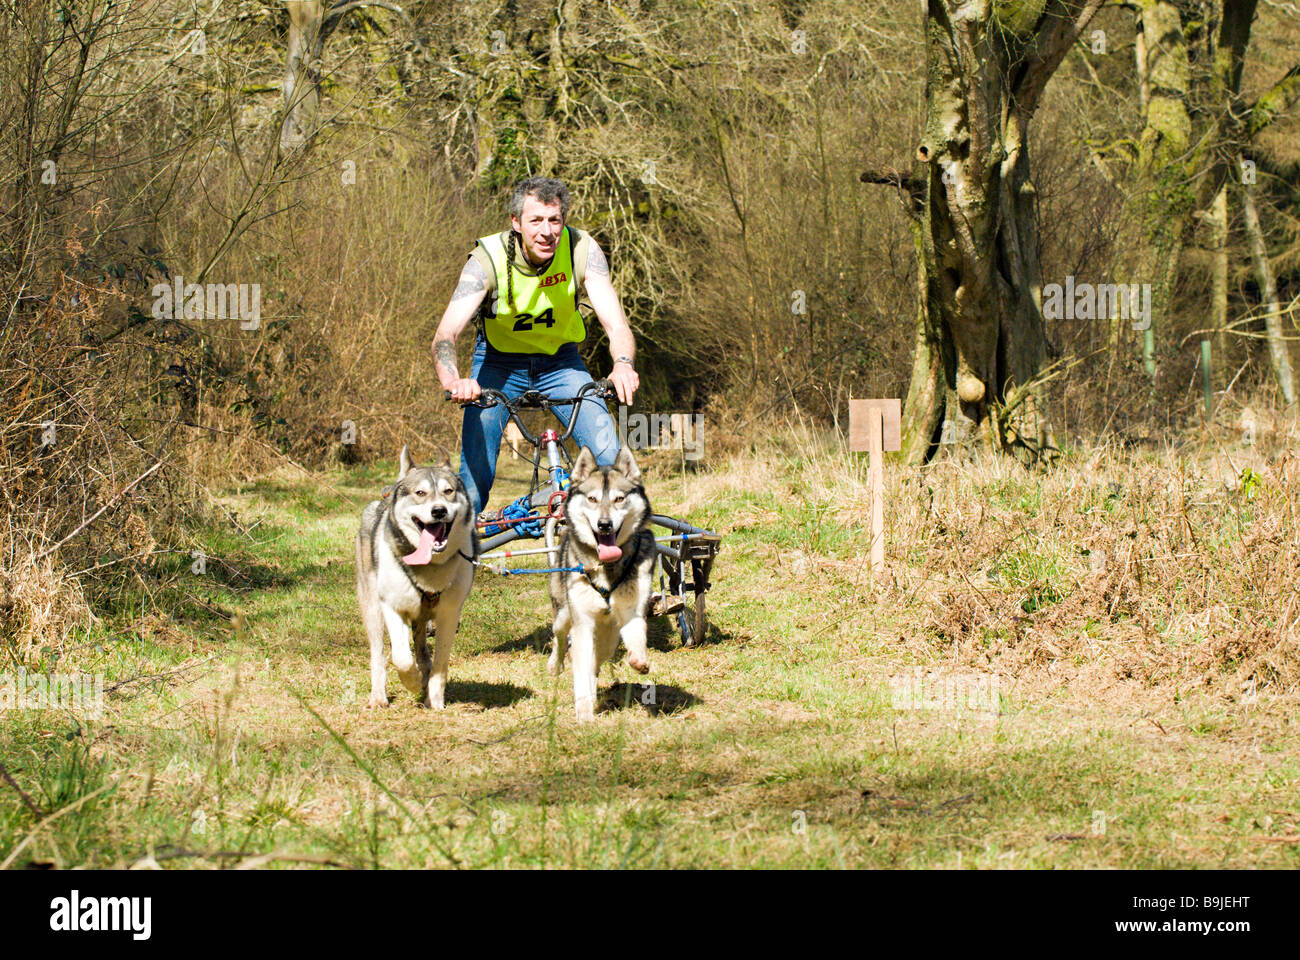 Sled dogs racing through a wood Stock Photo